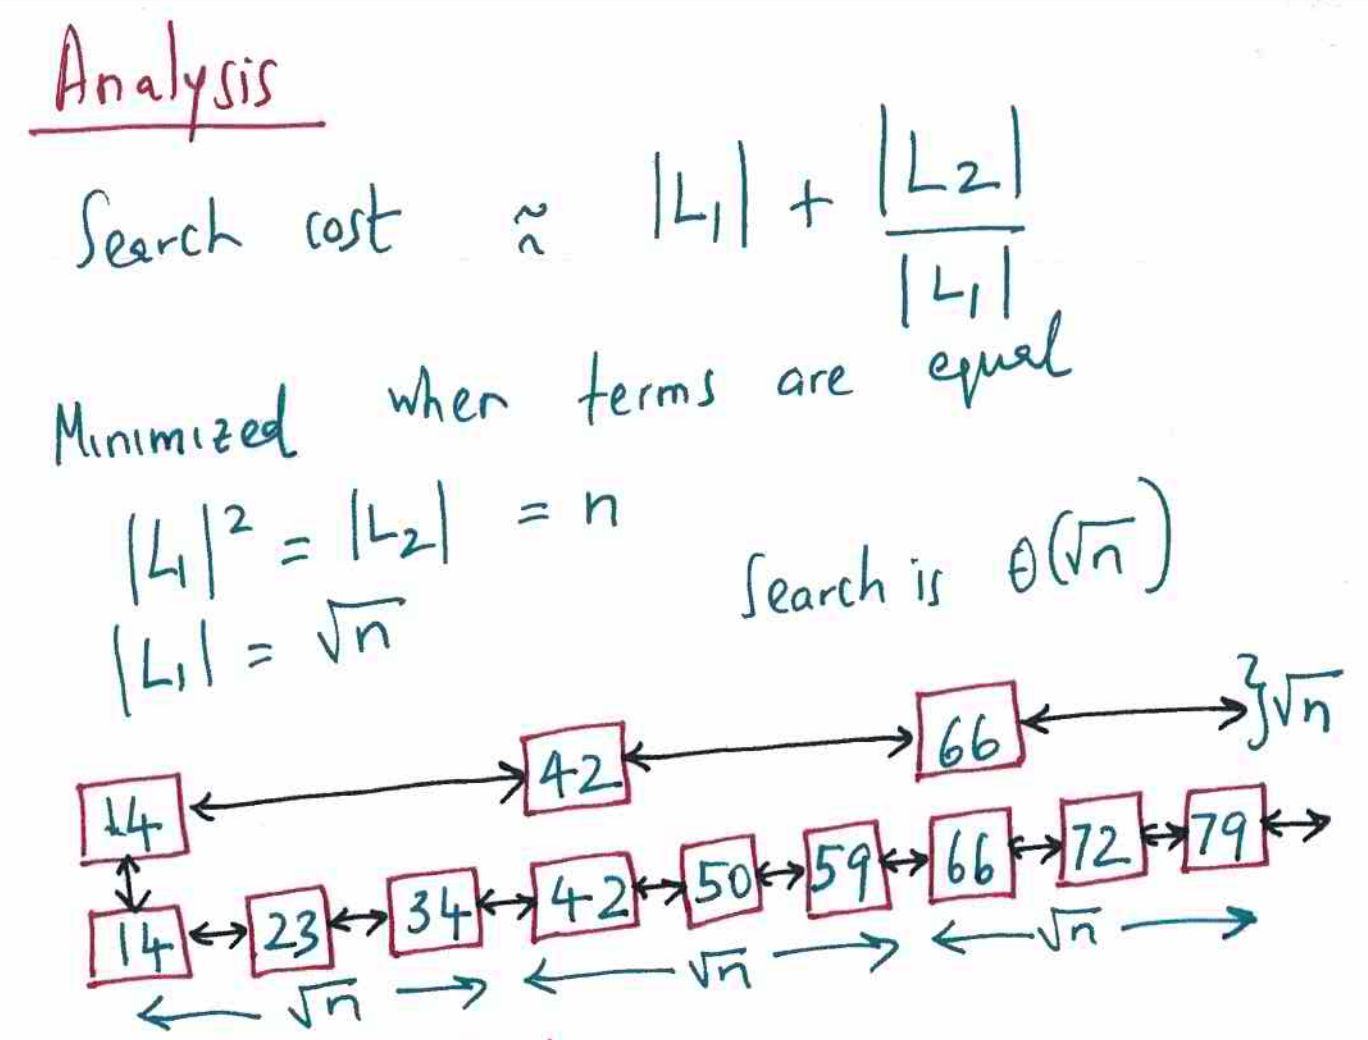 Analysis of two linked lists